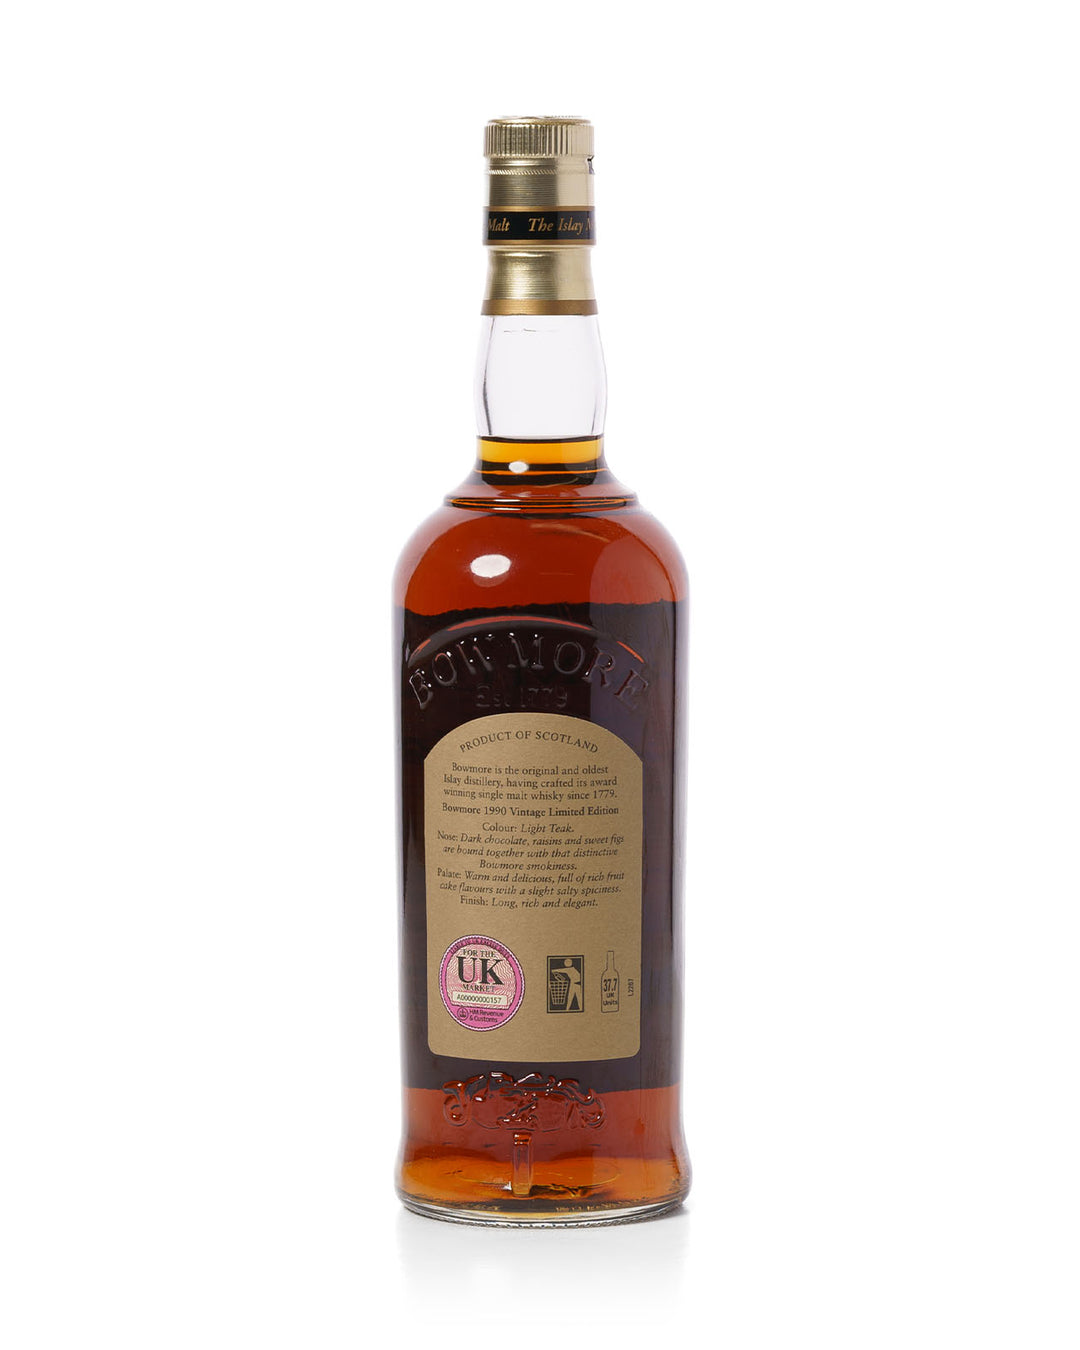 Bowmore 1990 16 Year Old Sherry Matured Natural Cask Strength With Original Box